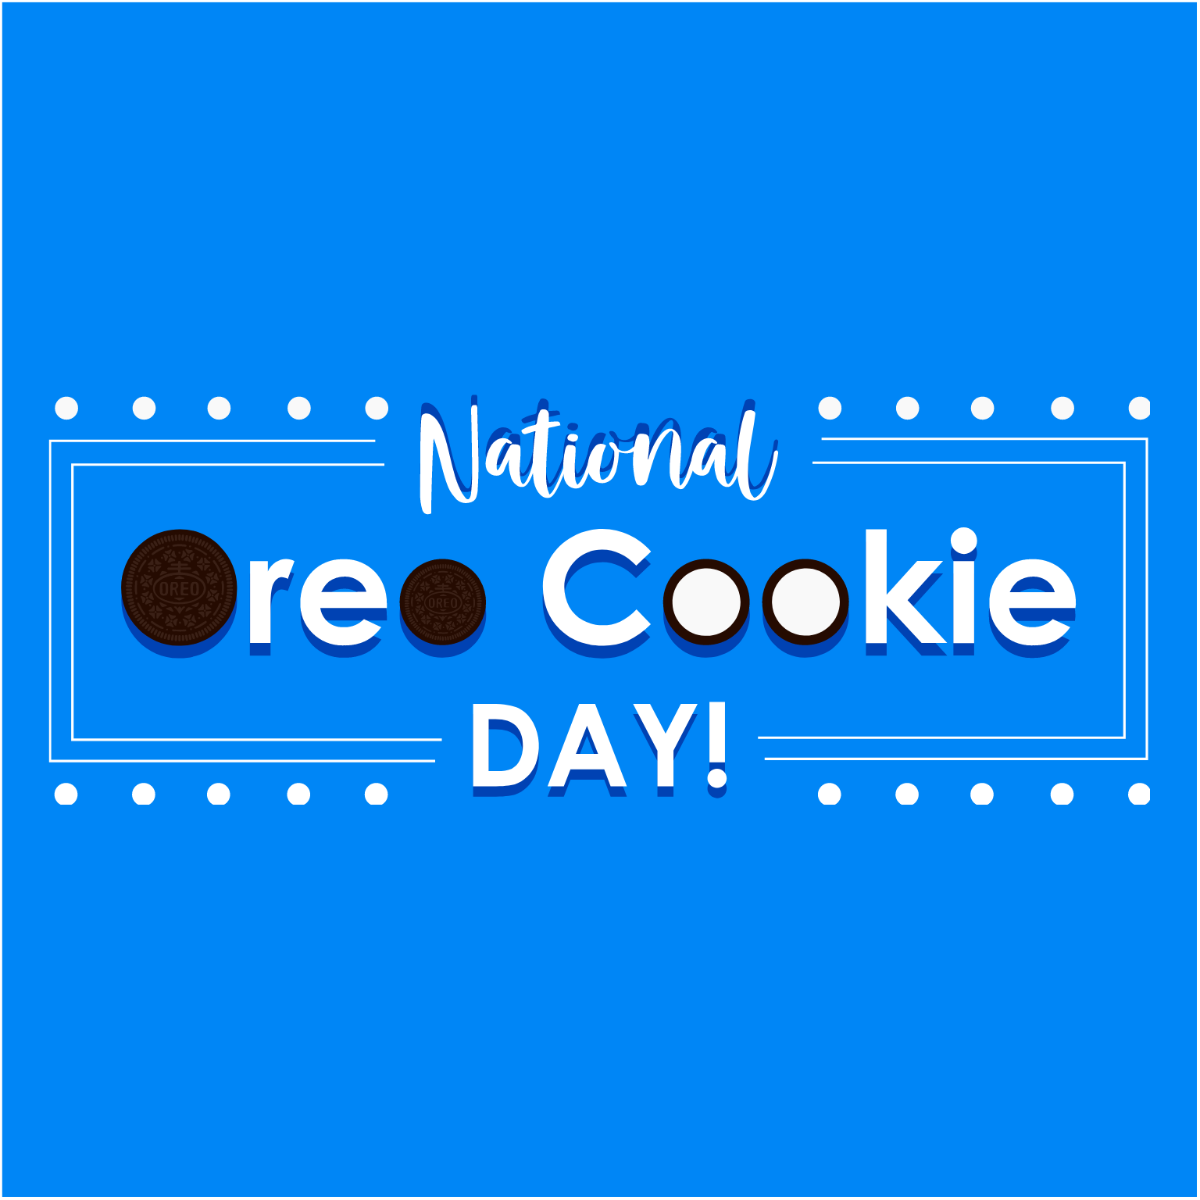 FREE National Oreo Cookie Day Template Download in PDF, Illustrator